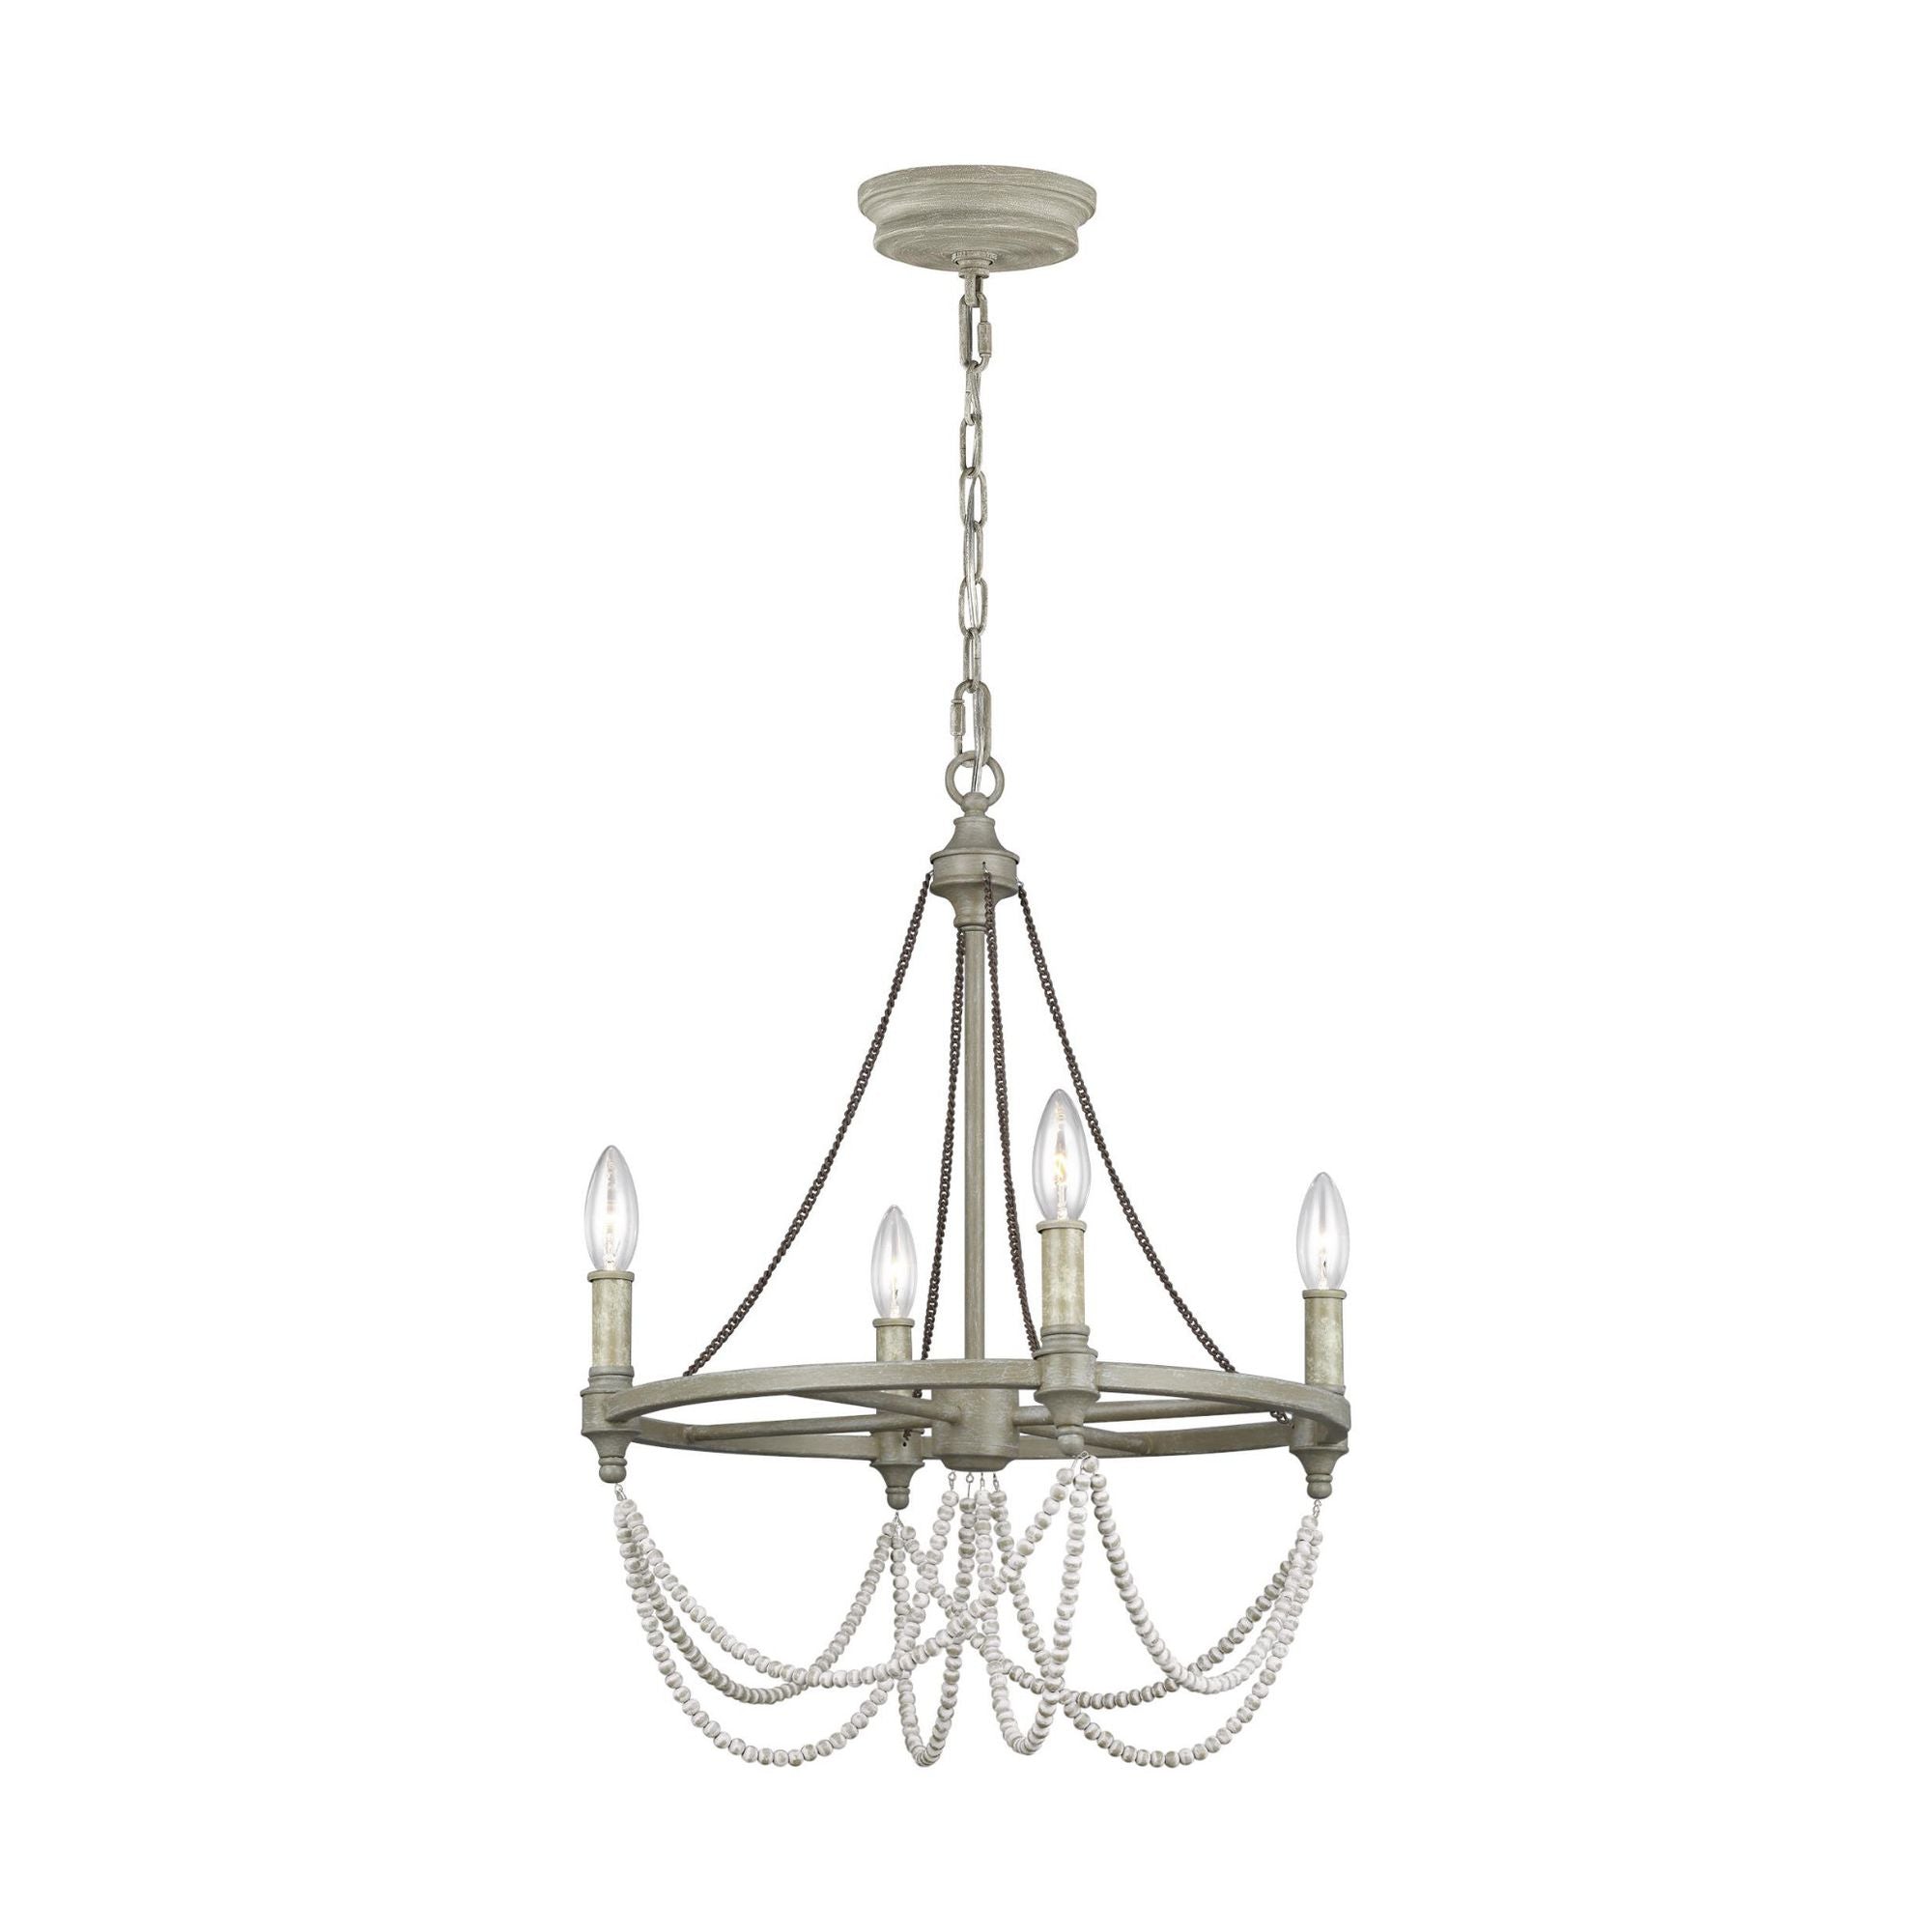 Sean Lavin Beverly Small Chandelier in French Washed Oak / Distressed White Wood